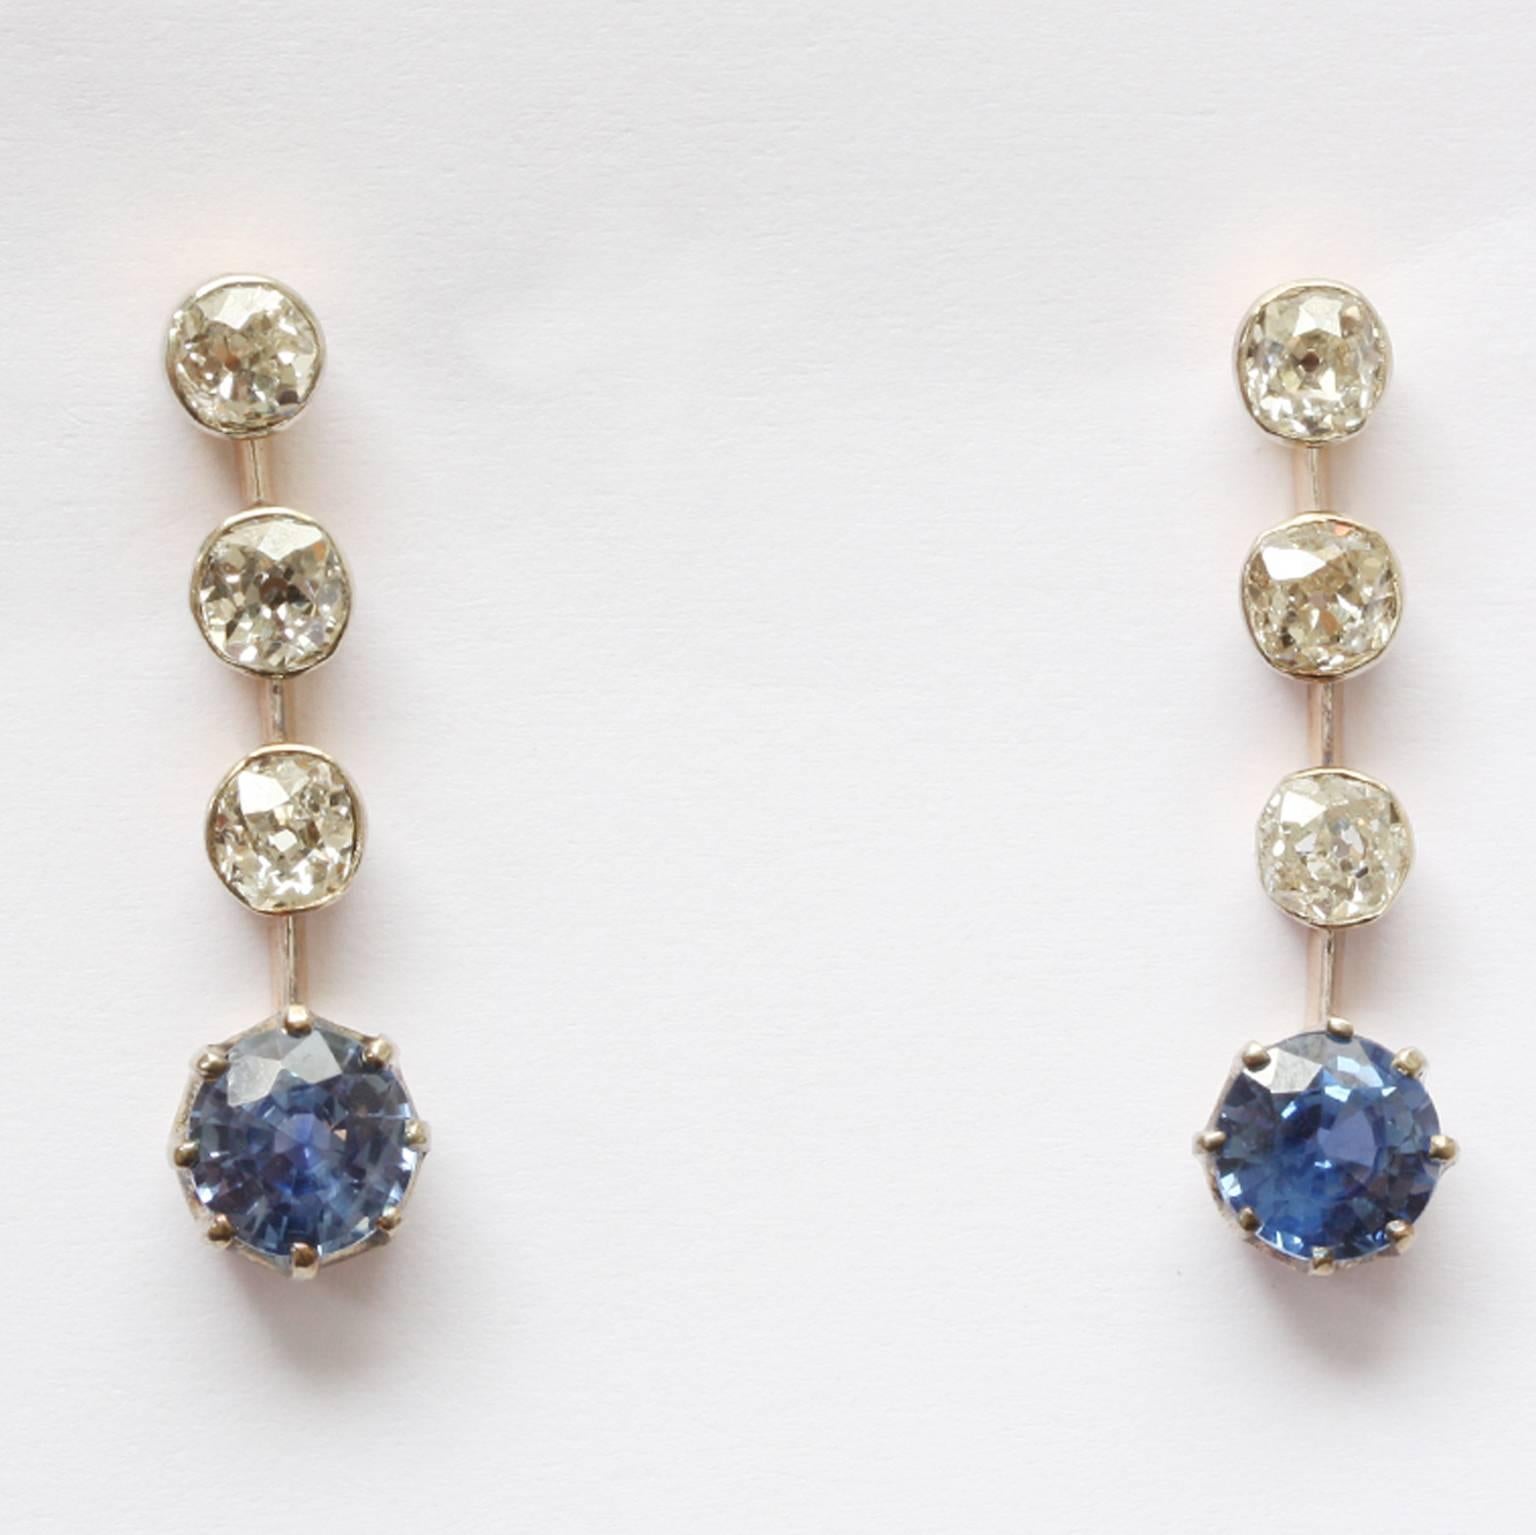 A pair of gold and silver earrings each set with three cushion cut diamonds (app. 1.5 carat in total) and brilliant cut natural sapphires (app. 0.8 carat).

weight: 4.1 grams
dimensions: 2.7 x 0.6 cm